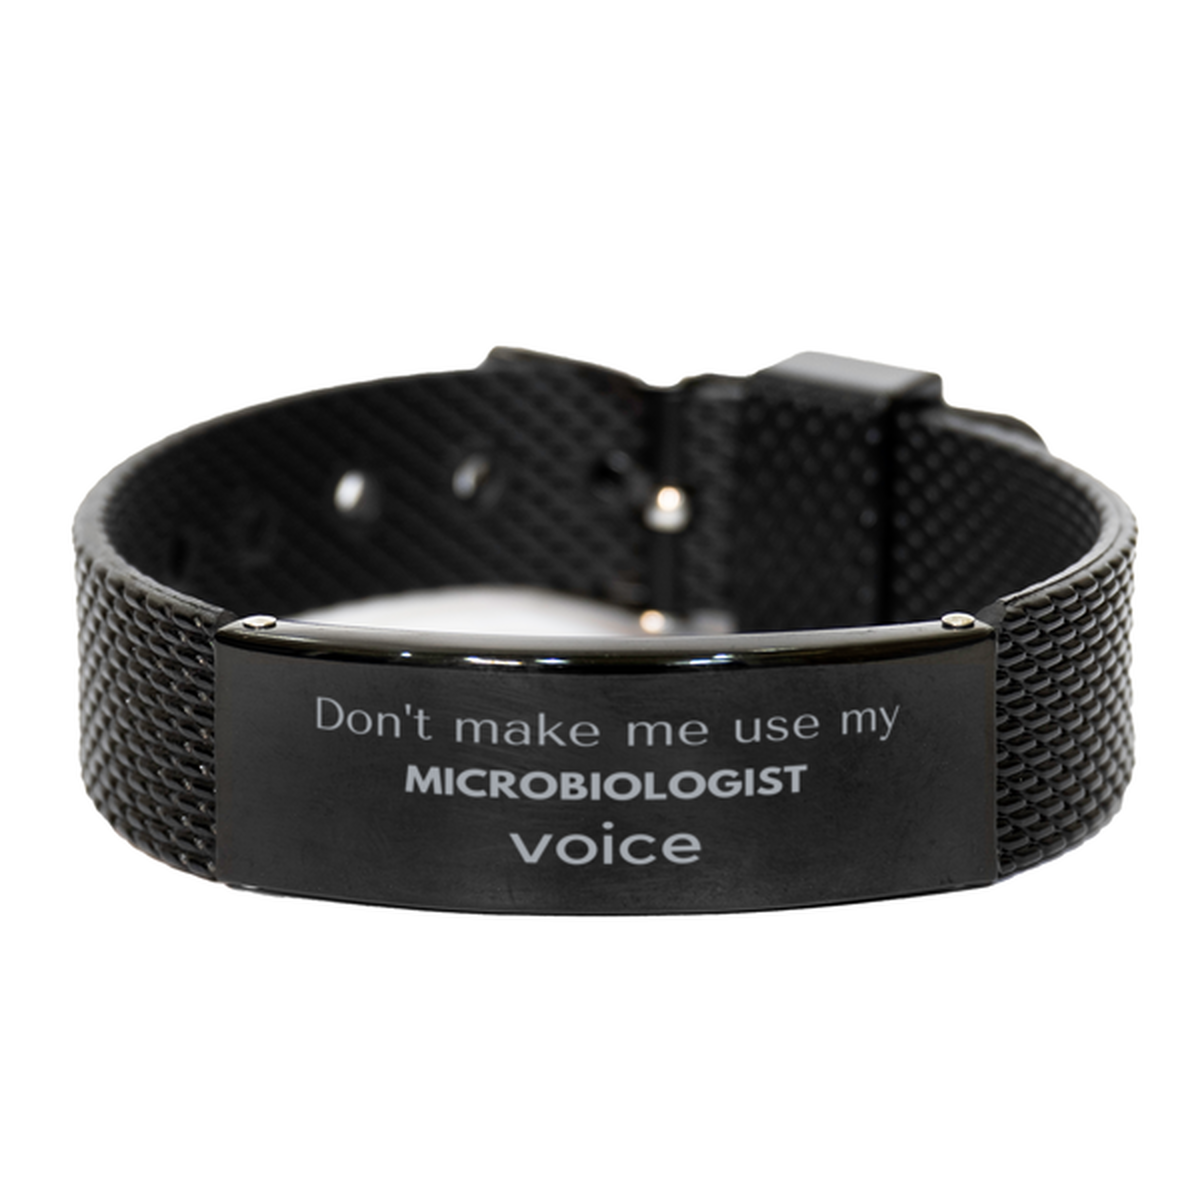 Don't make me use my Microbiologist voice, Sarcasm Microbiologist Gifts, Christmas Microbiologist Black Shark Mesh Bracelet Birthday Unique Gifts For Microbiologist Coworkers, Men, Women, Colleague, Friends